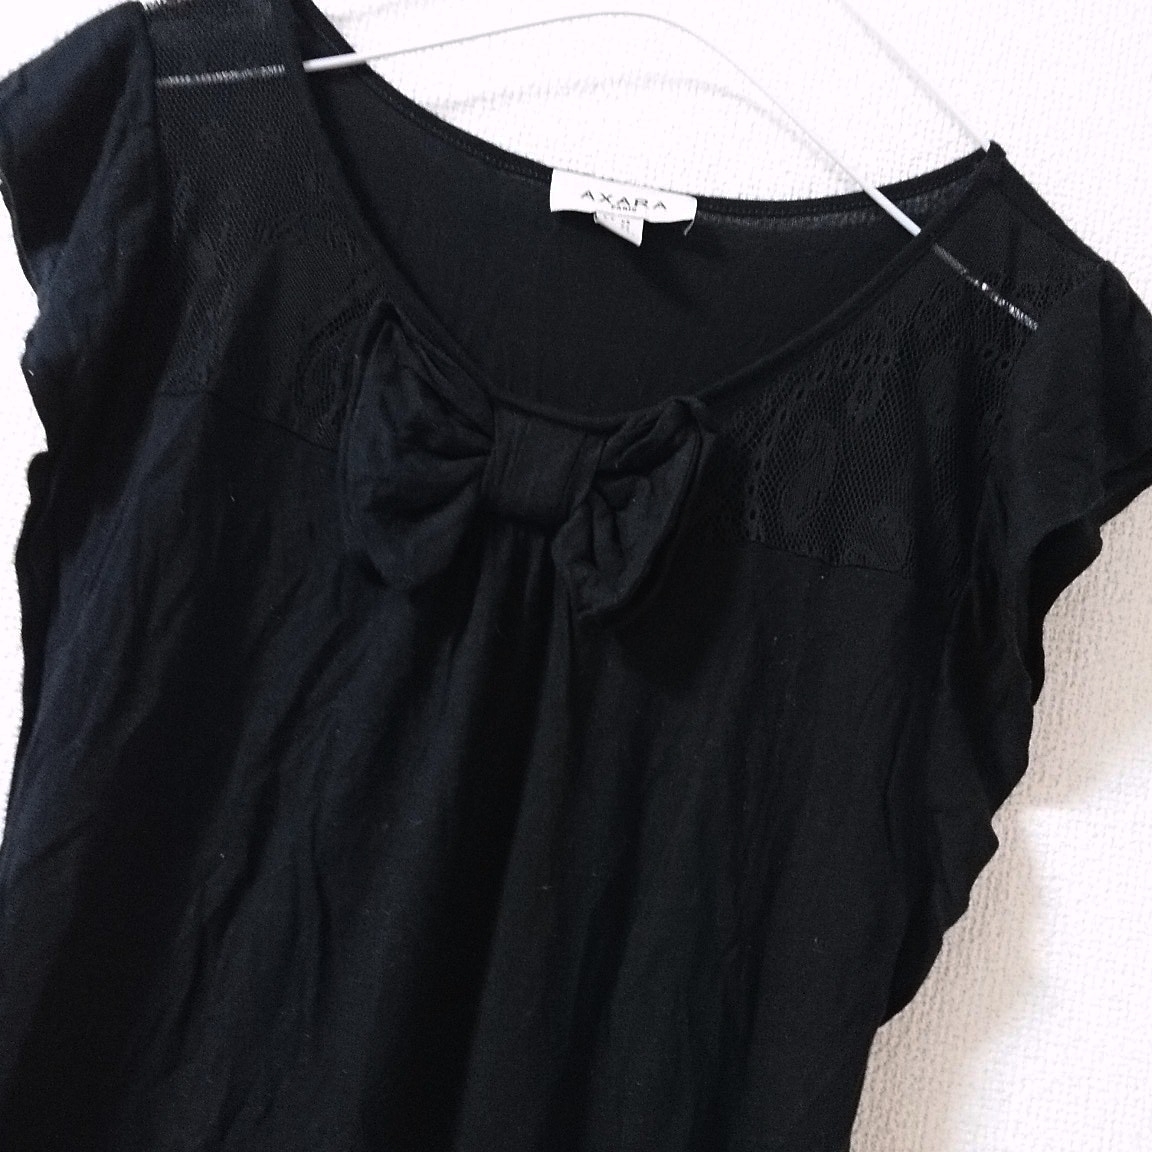  French sleeve ribbon race One-piece tops cut and sewn pull over XS 34 small size AXARAa Xsara imported car Paris ZARA